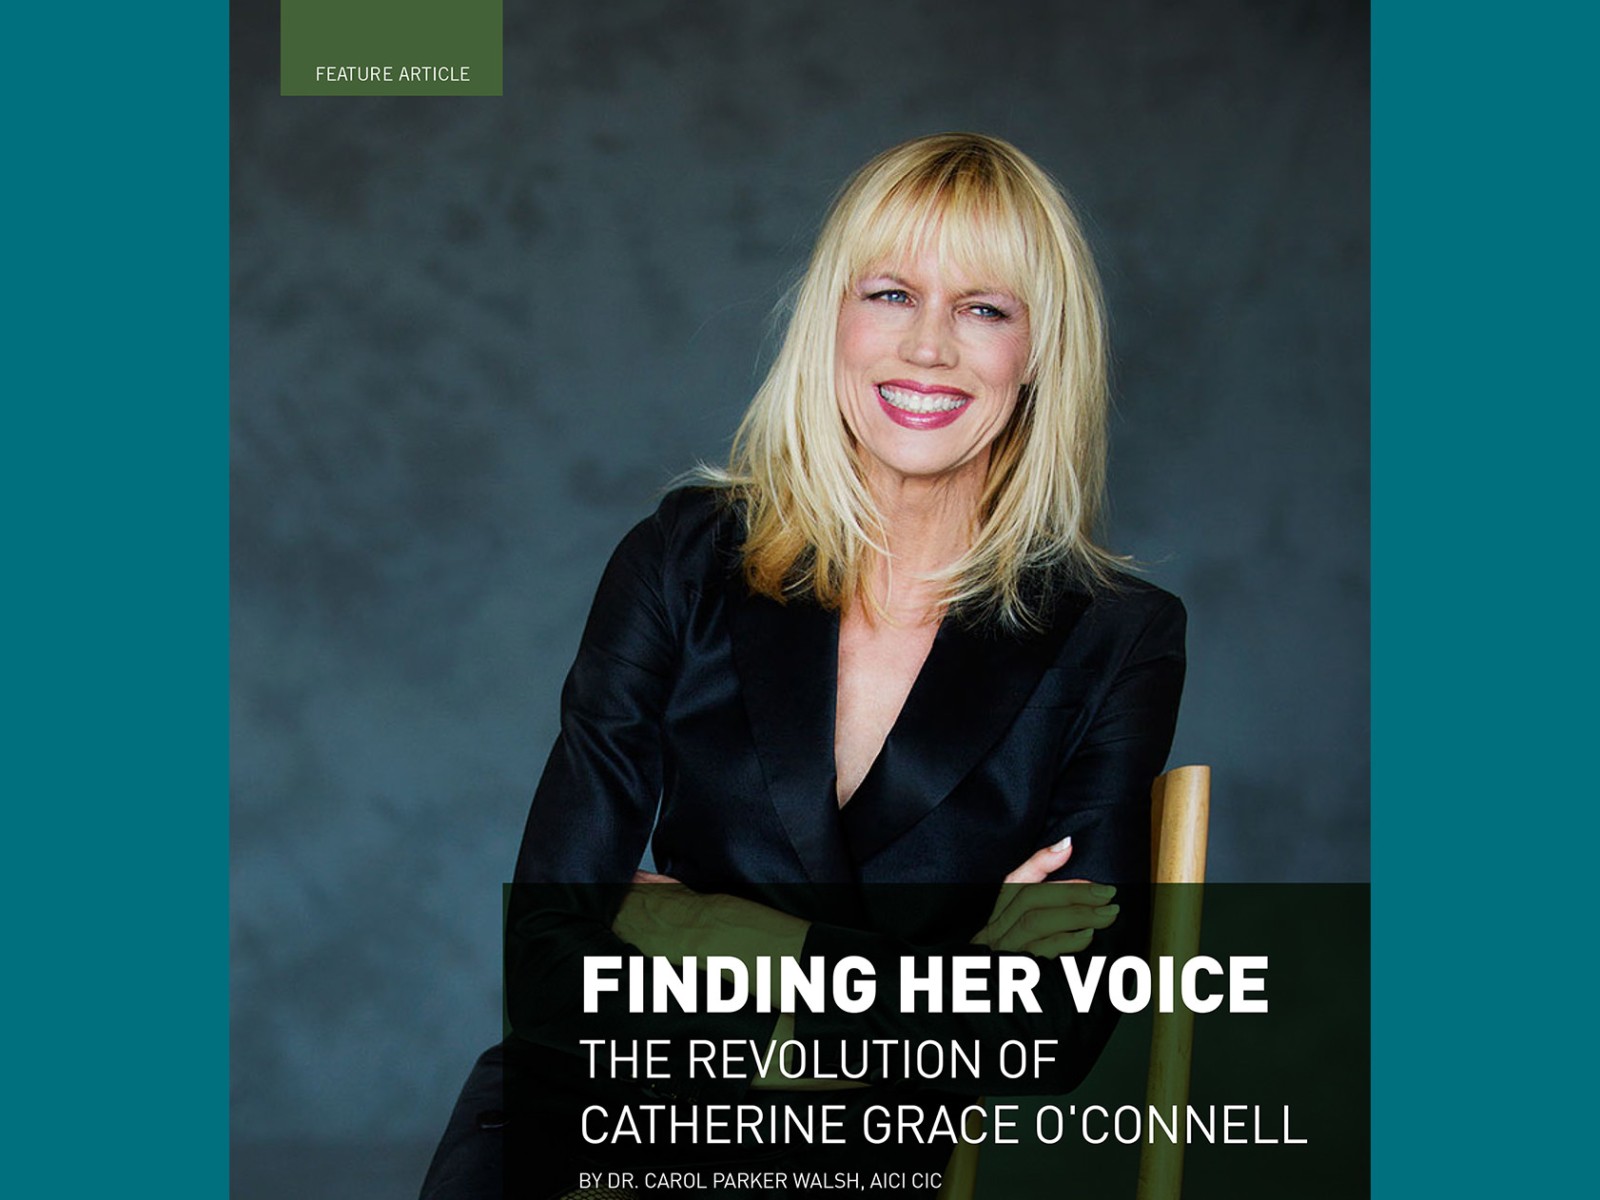 Finding Her Voice: The Revolution of Catherine Grace O’Connell